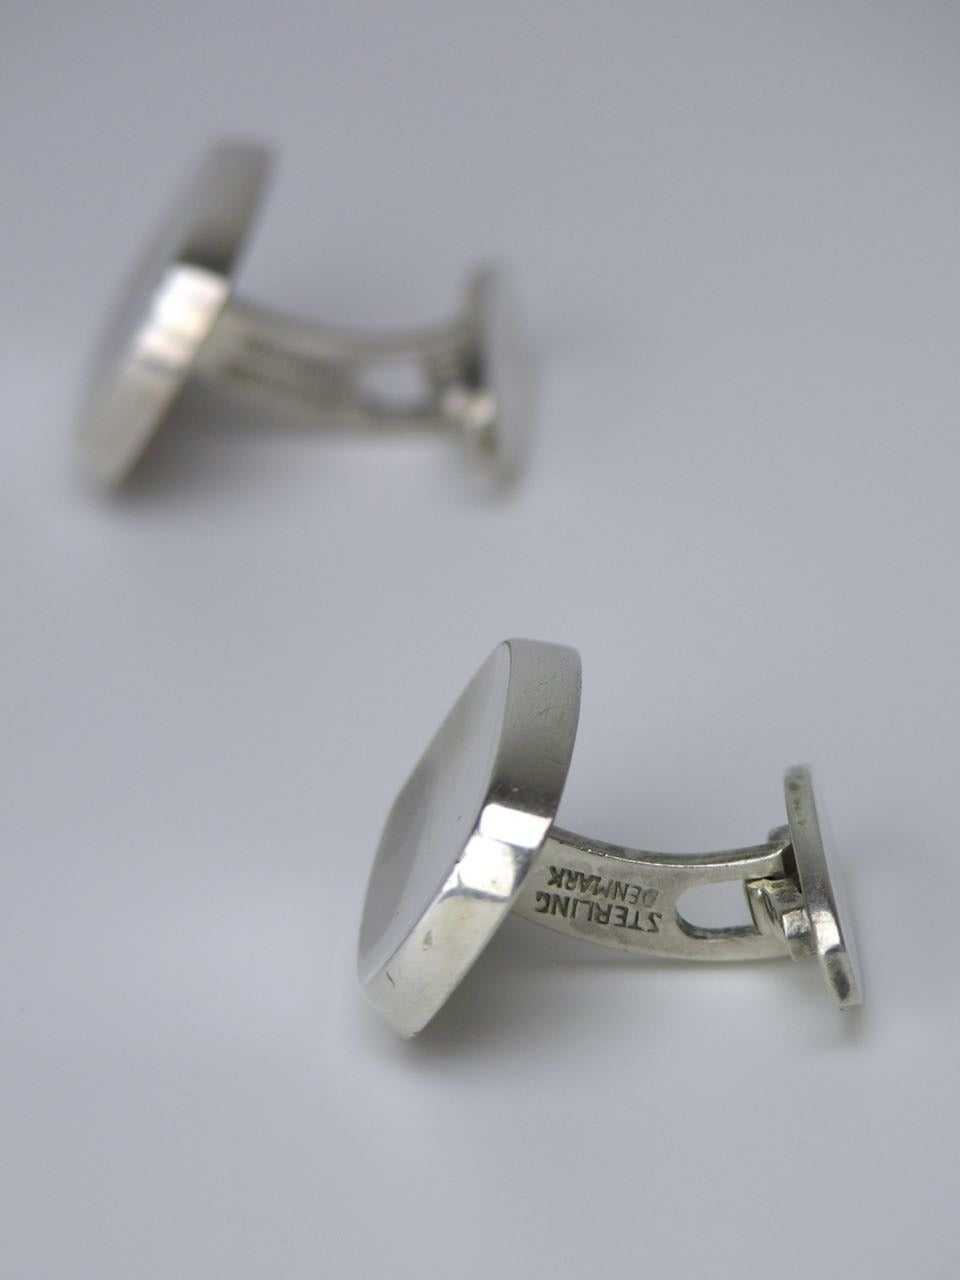 A pair of solid silver concave lozenge shape cufflinks by Bent Knudsen each cufflink consisting of a thick concave lozenge shape tablet with a bevelled edge on an arched oval toggle back fitting. 

- Signed Bentk for Bent Knudsen of Denmark 
-